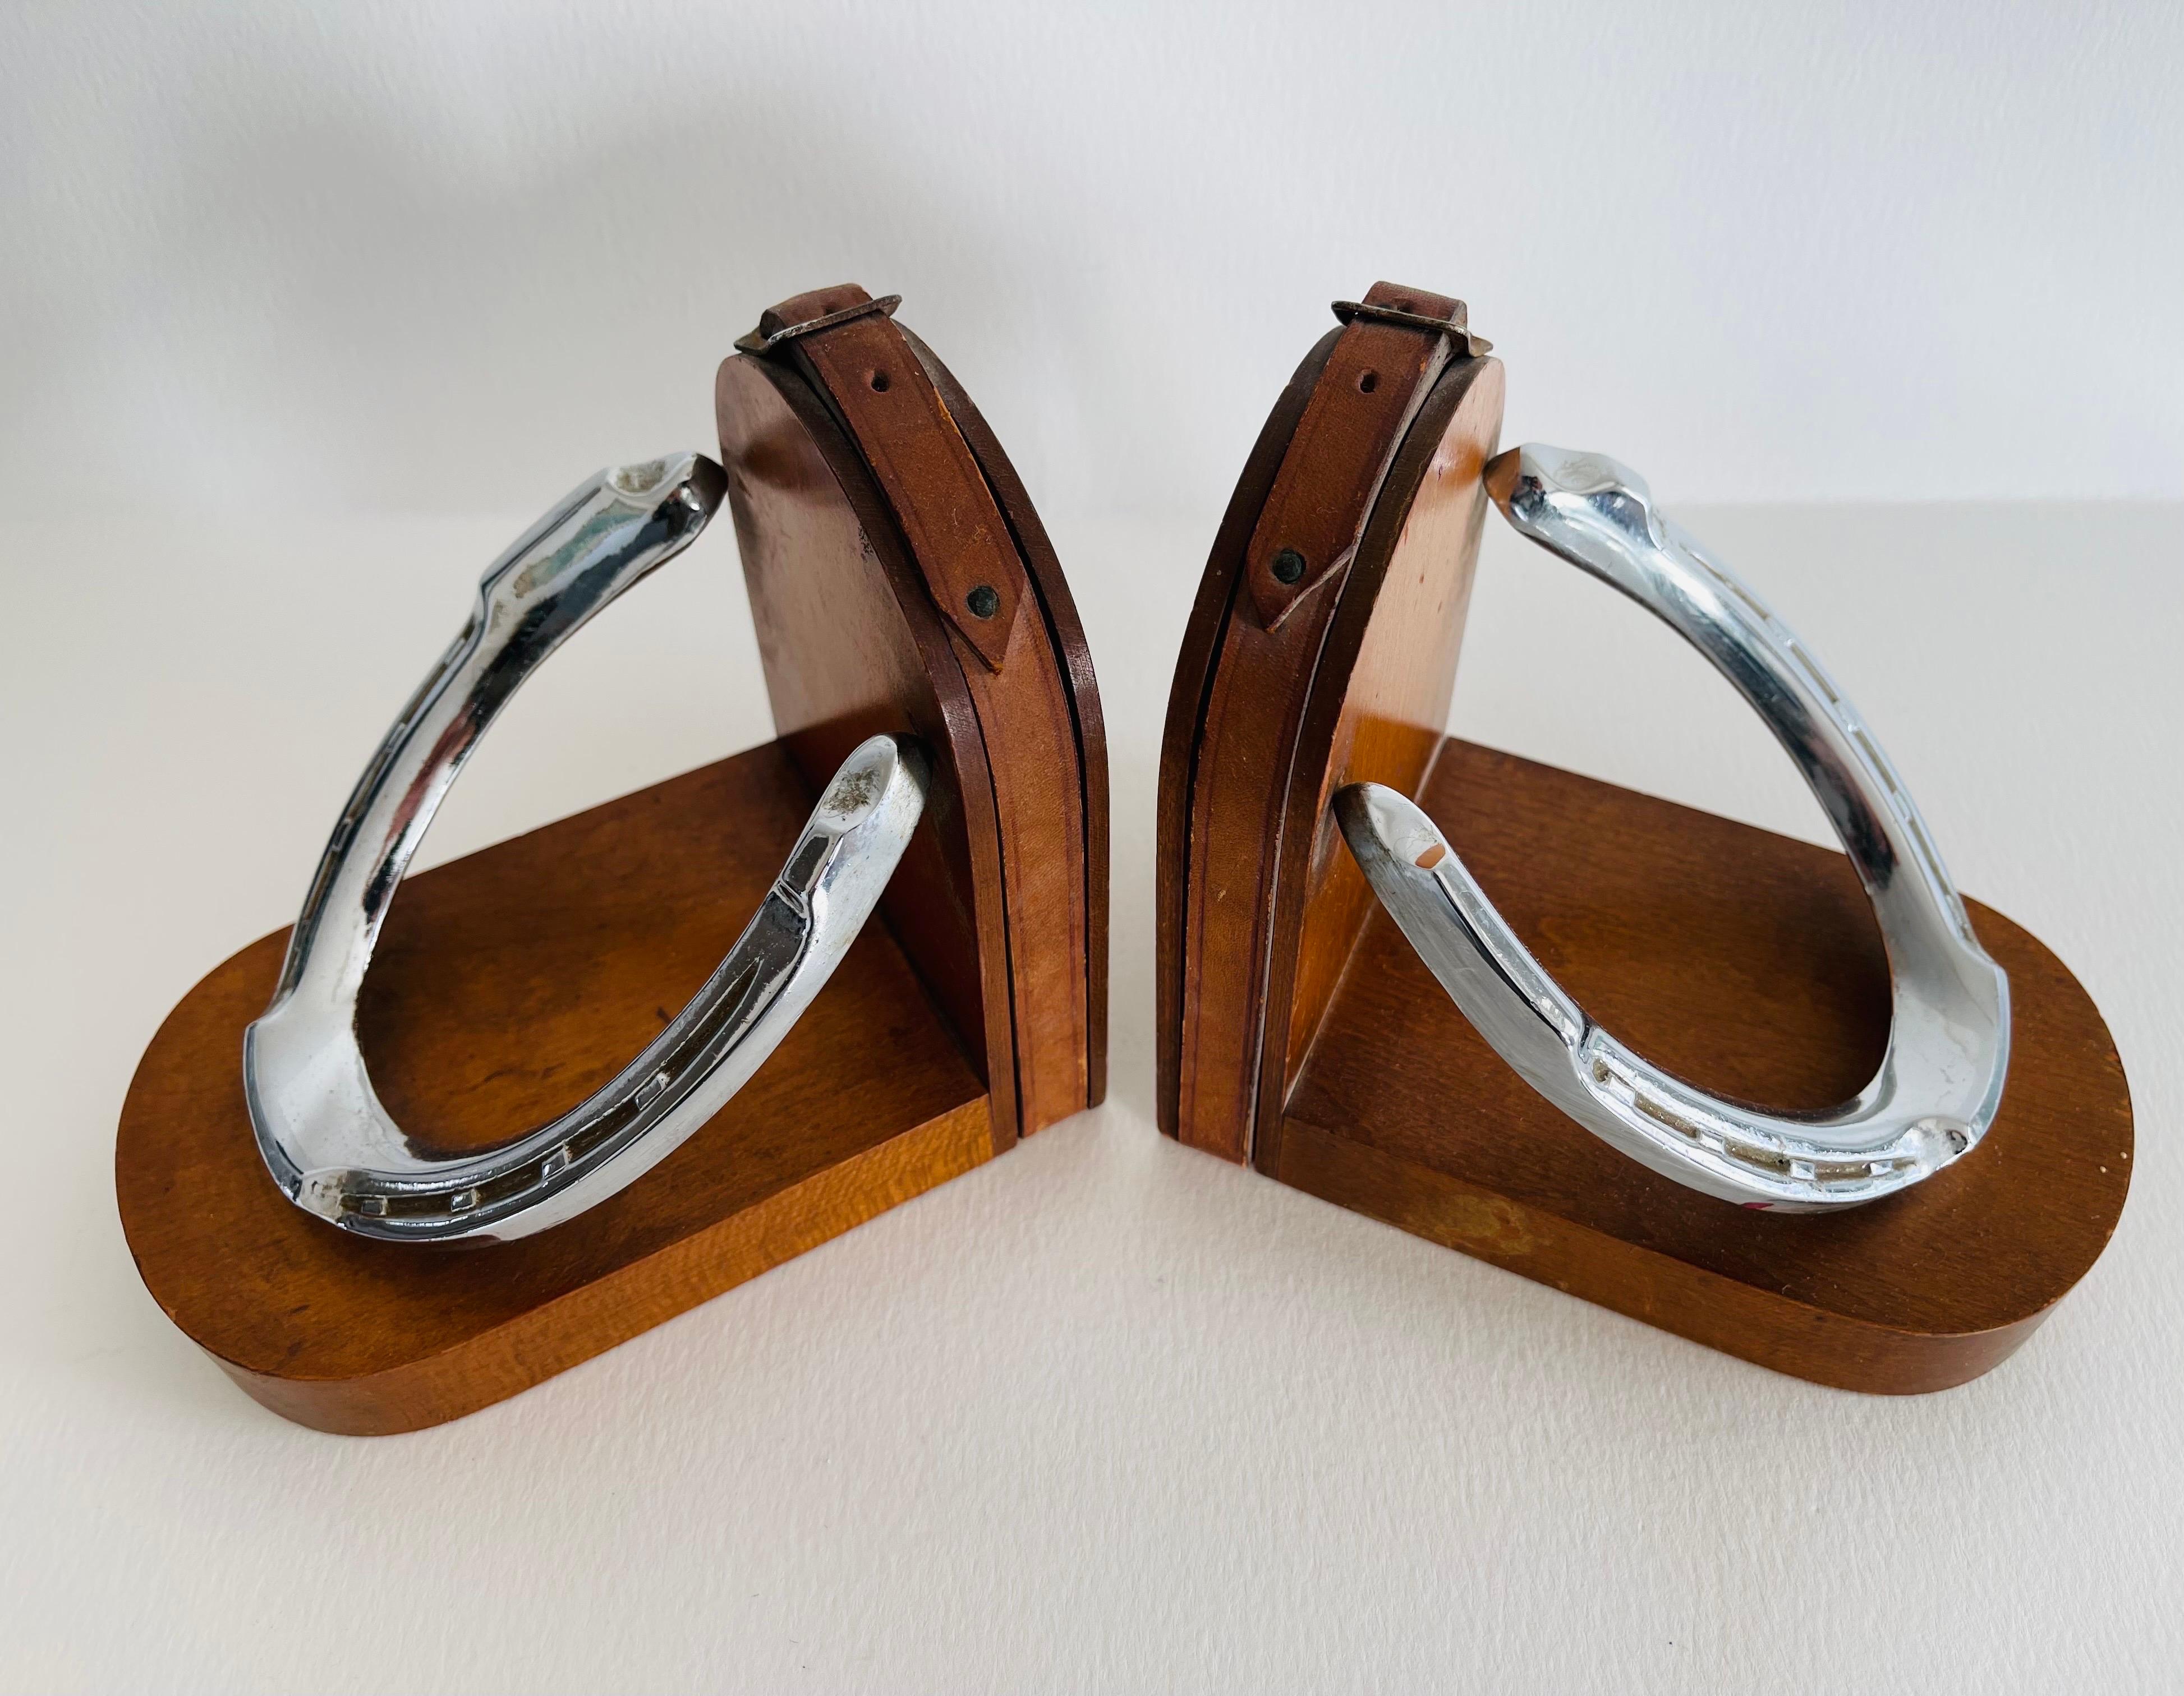 Vintage 1950s pair of bookends with chrome horseshoes and leather straps. Bookends are on a wood base. No marks.